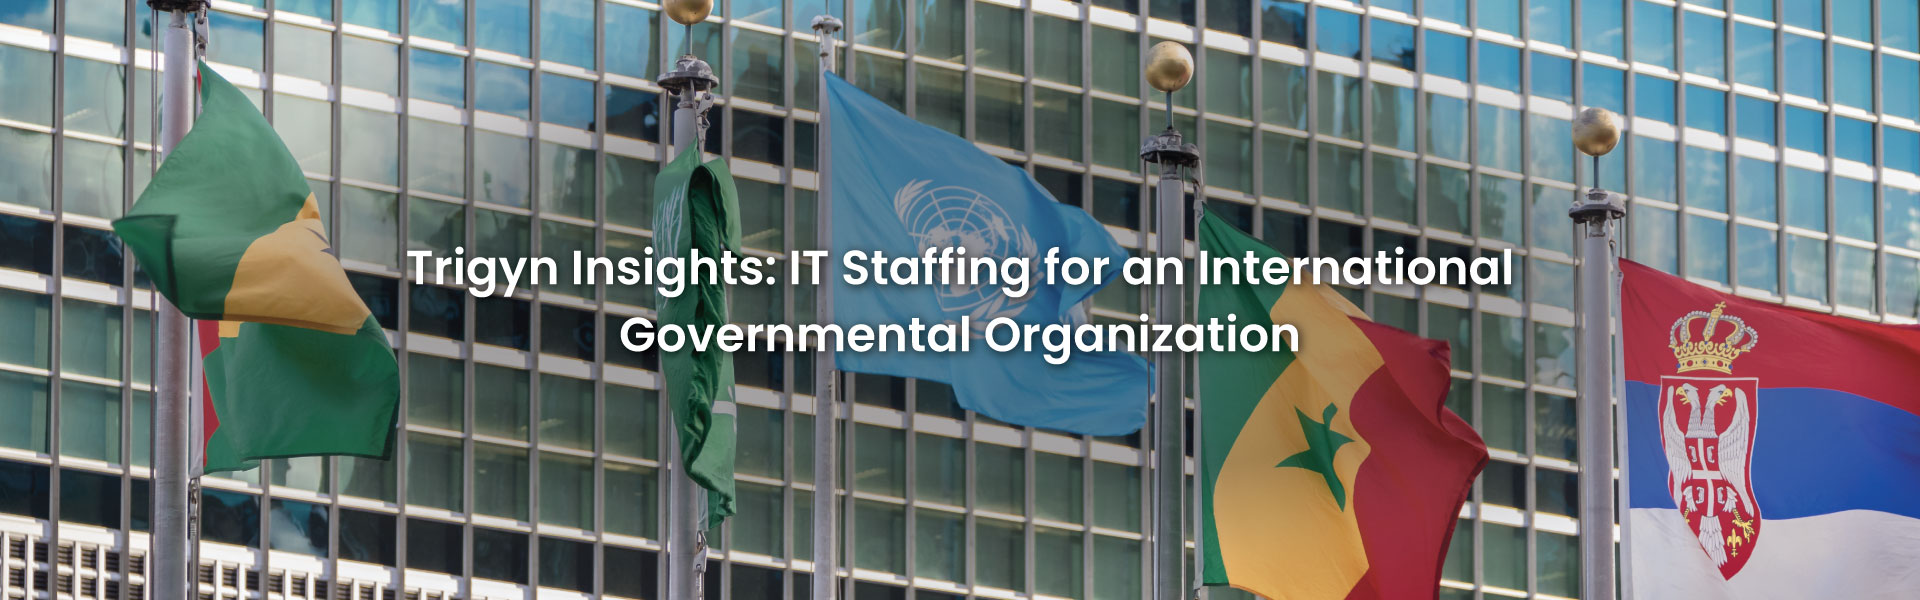 IT Staffing for an International Governmental Organization